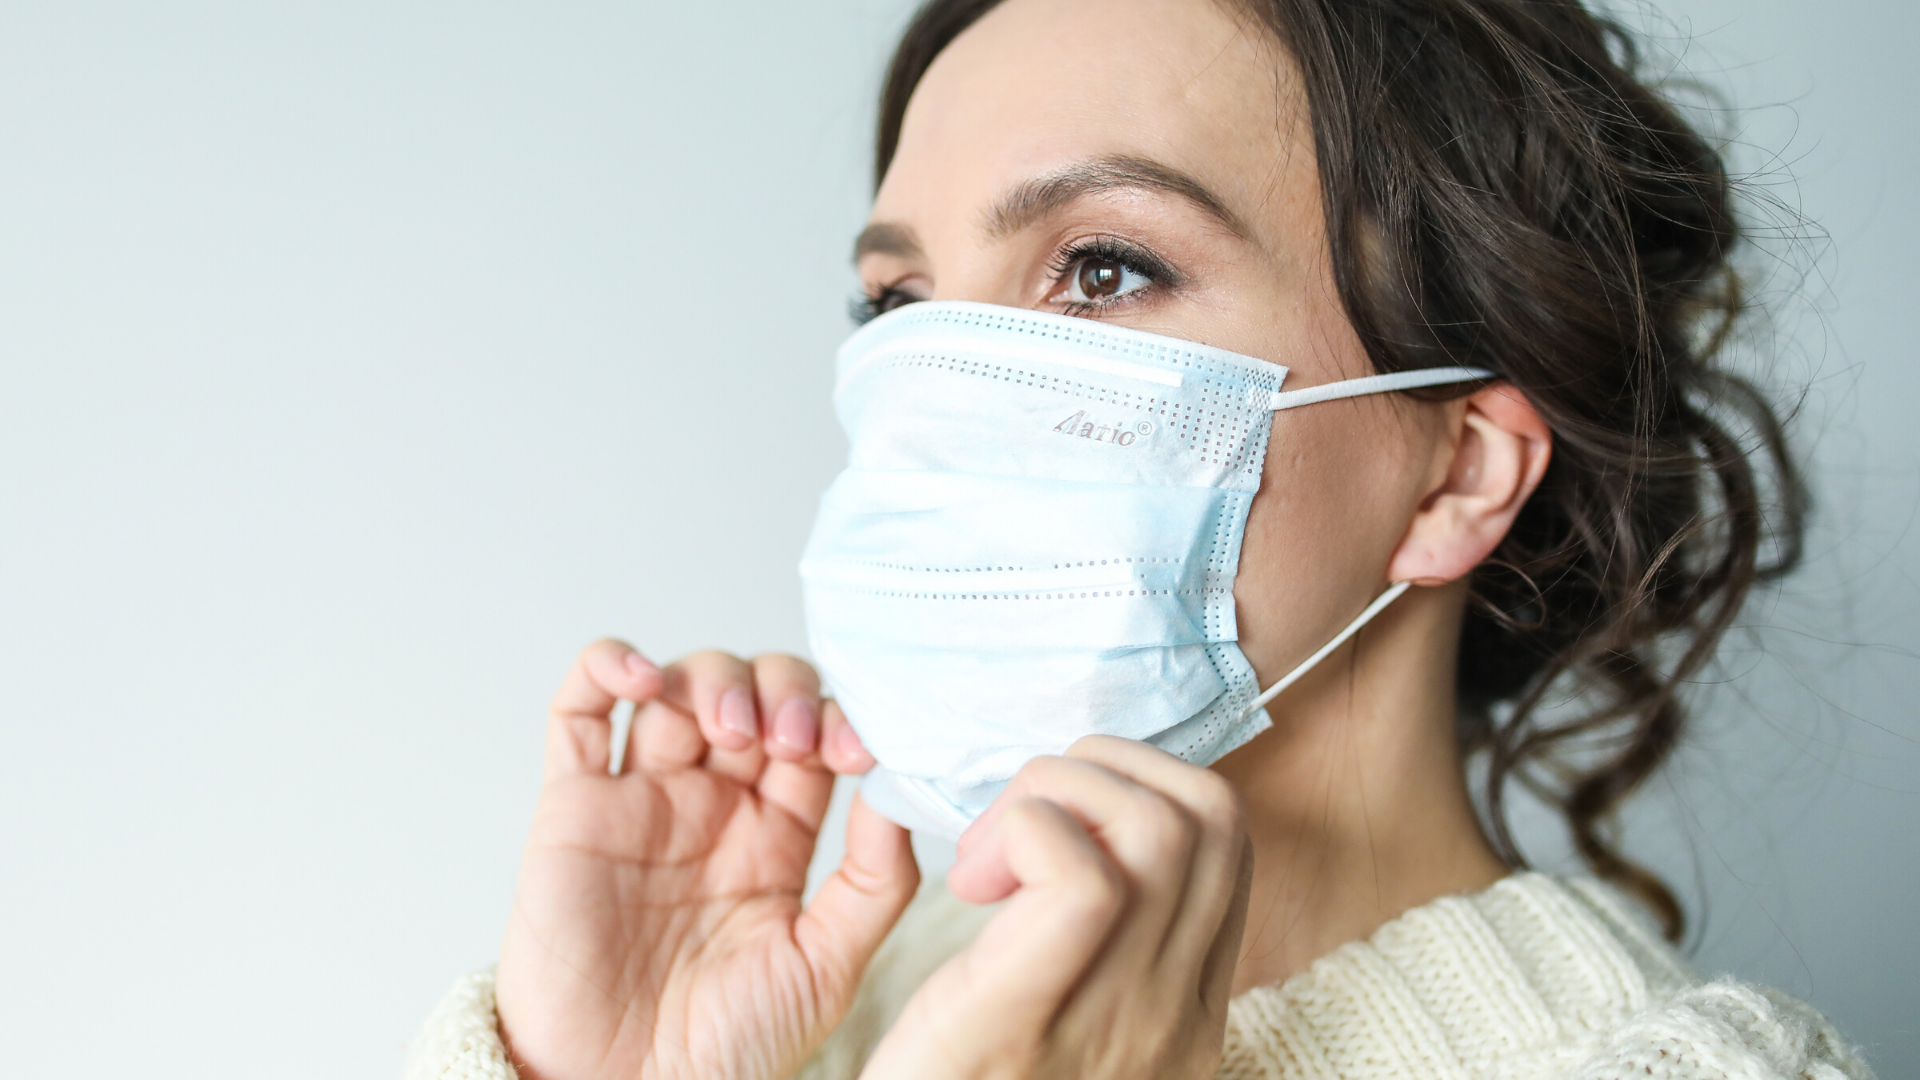 Mask Mandates on the Rise But Where is the Health Emergency?